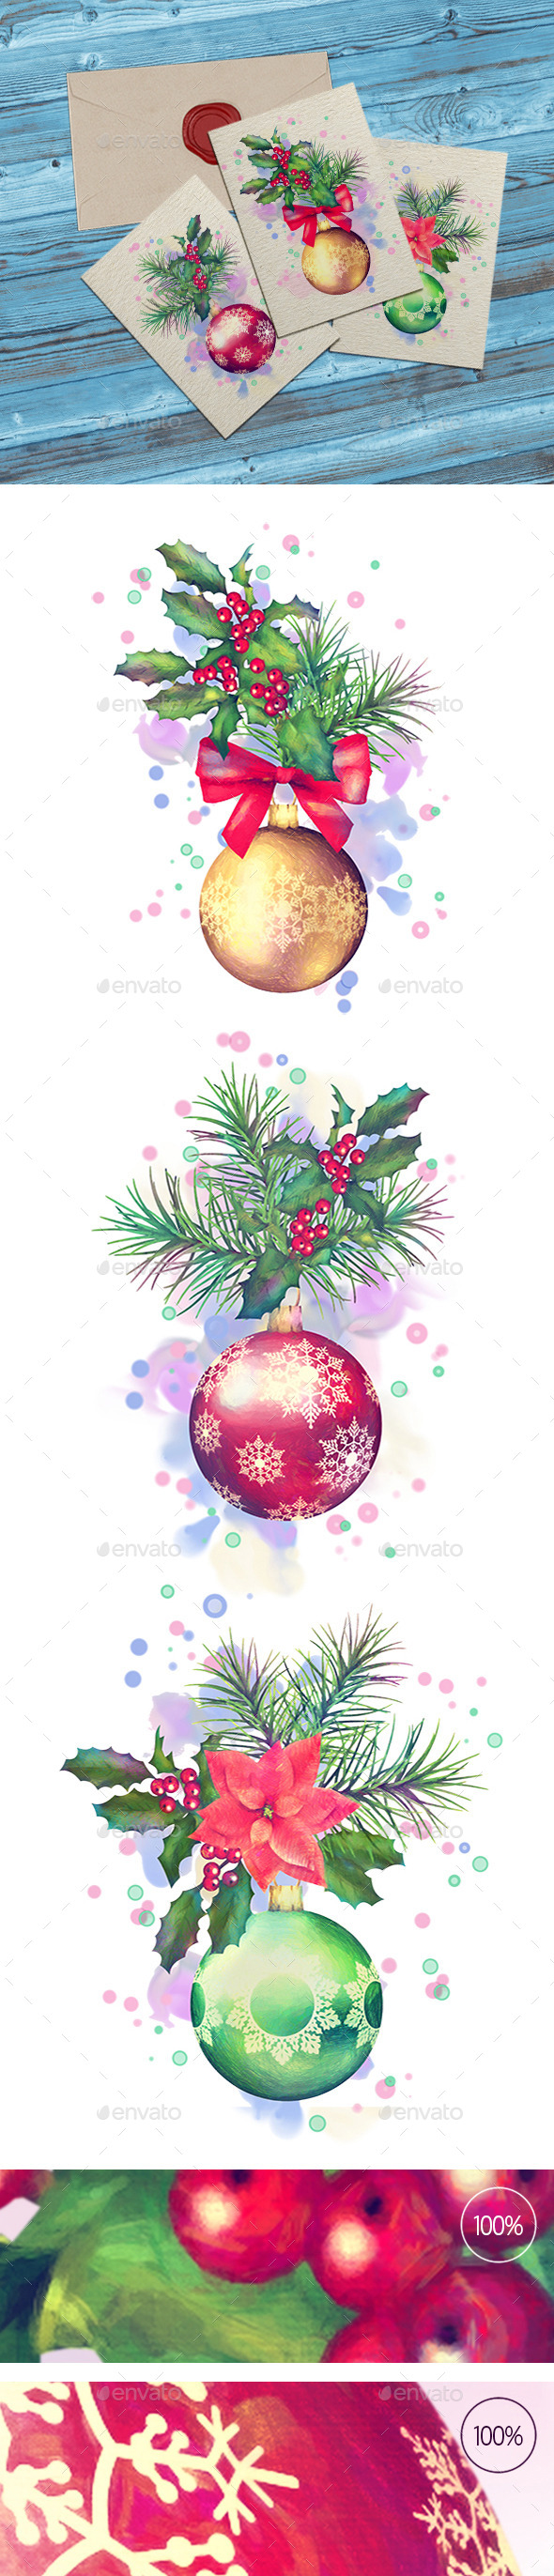 Watercolor Painting Christmas Ornaments